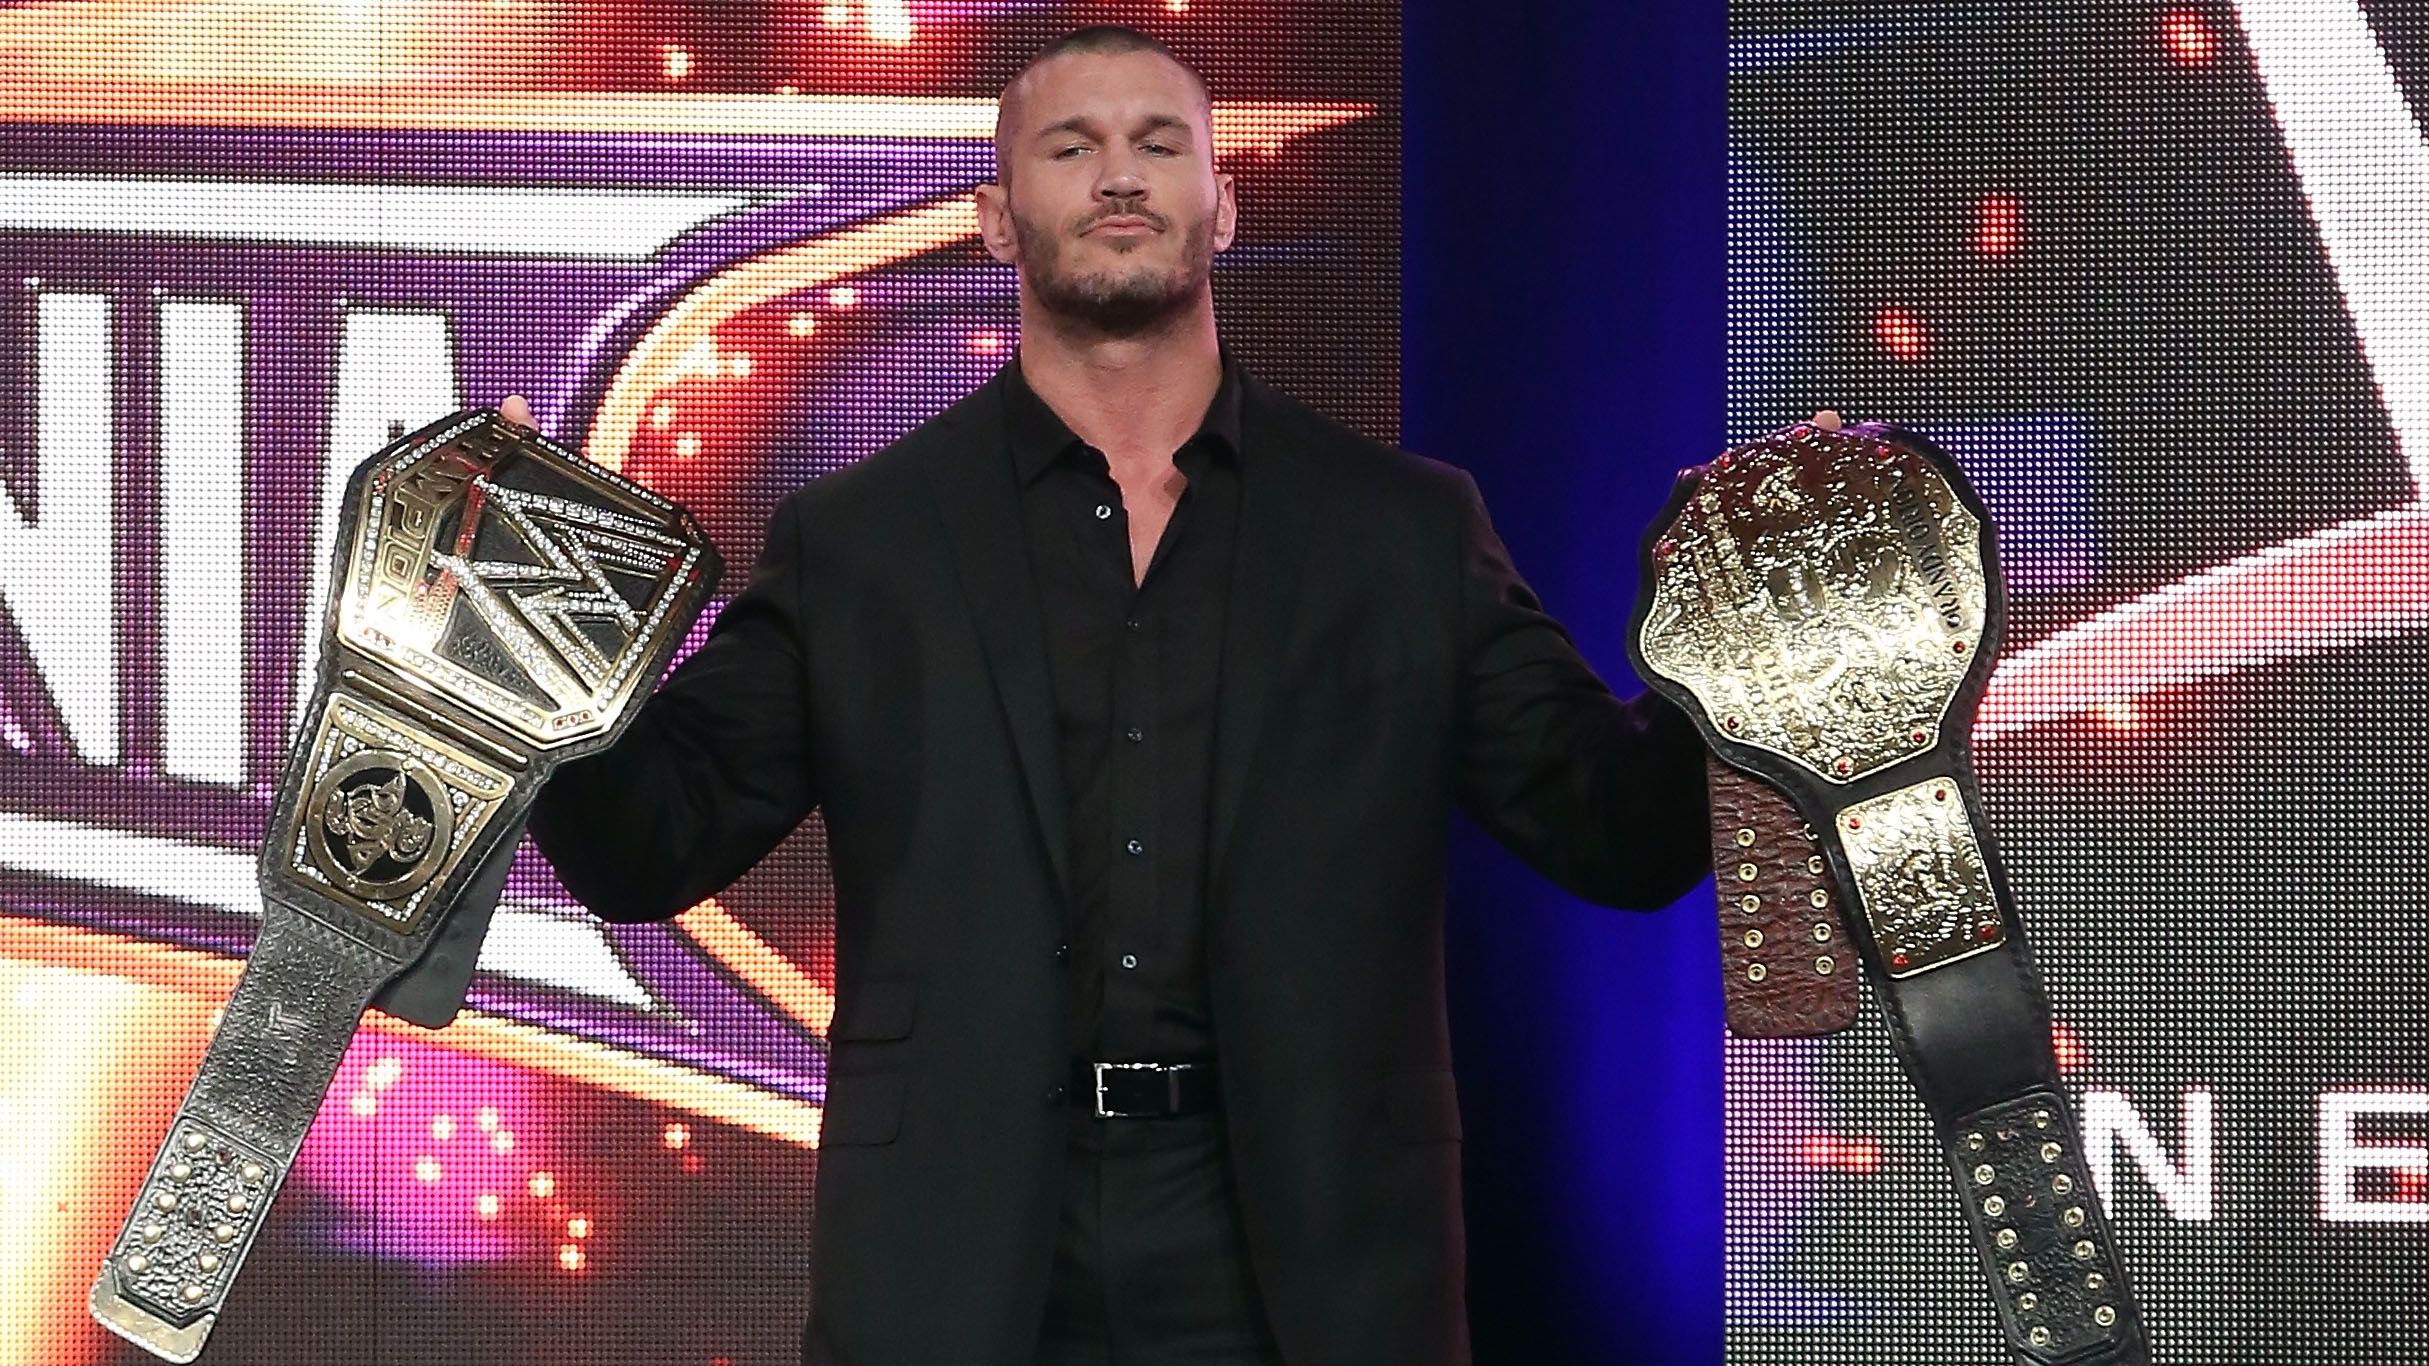  WWE wrestler Randy Orton reportedly forked over a thousand bucks to get someone to level his Elden Ring character for him 